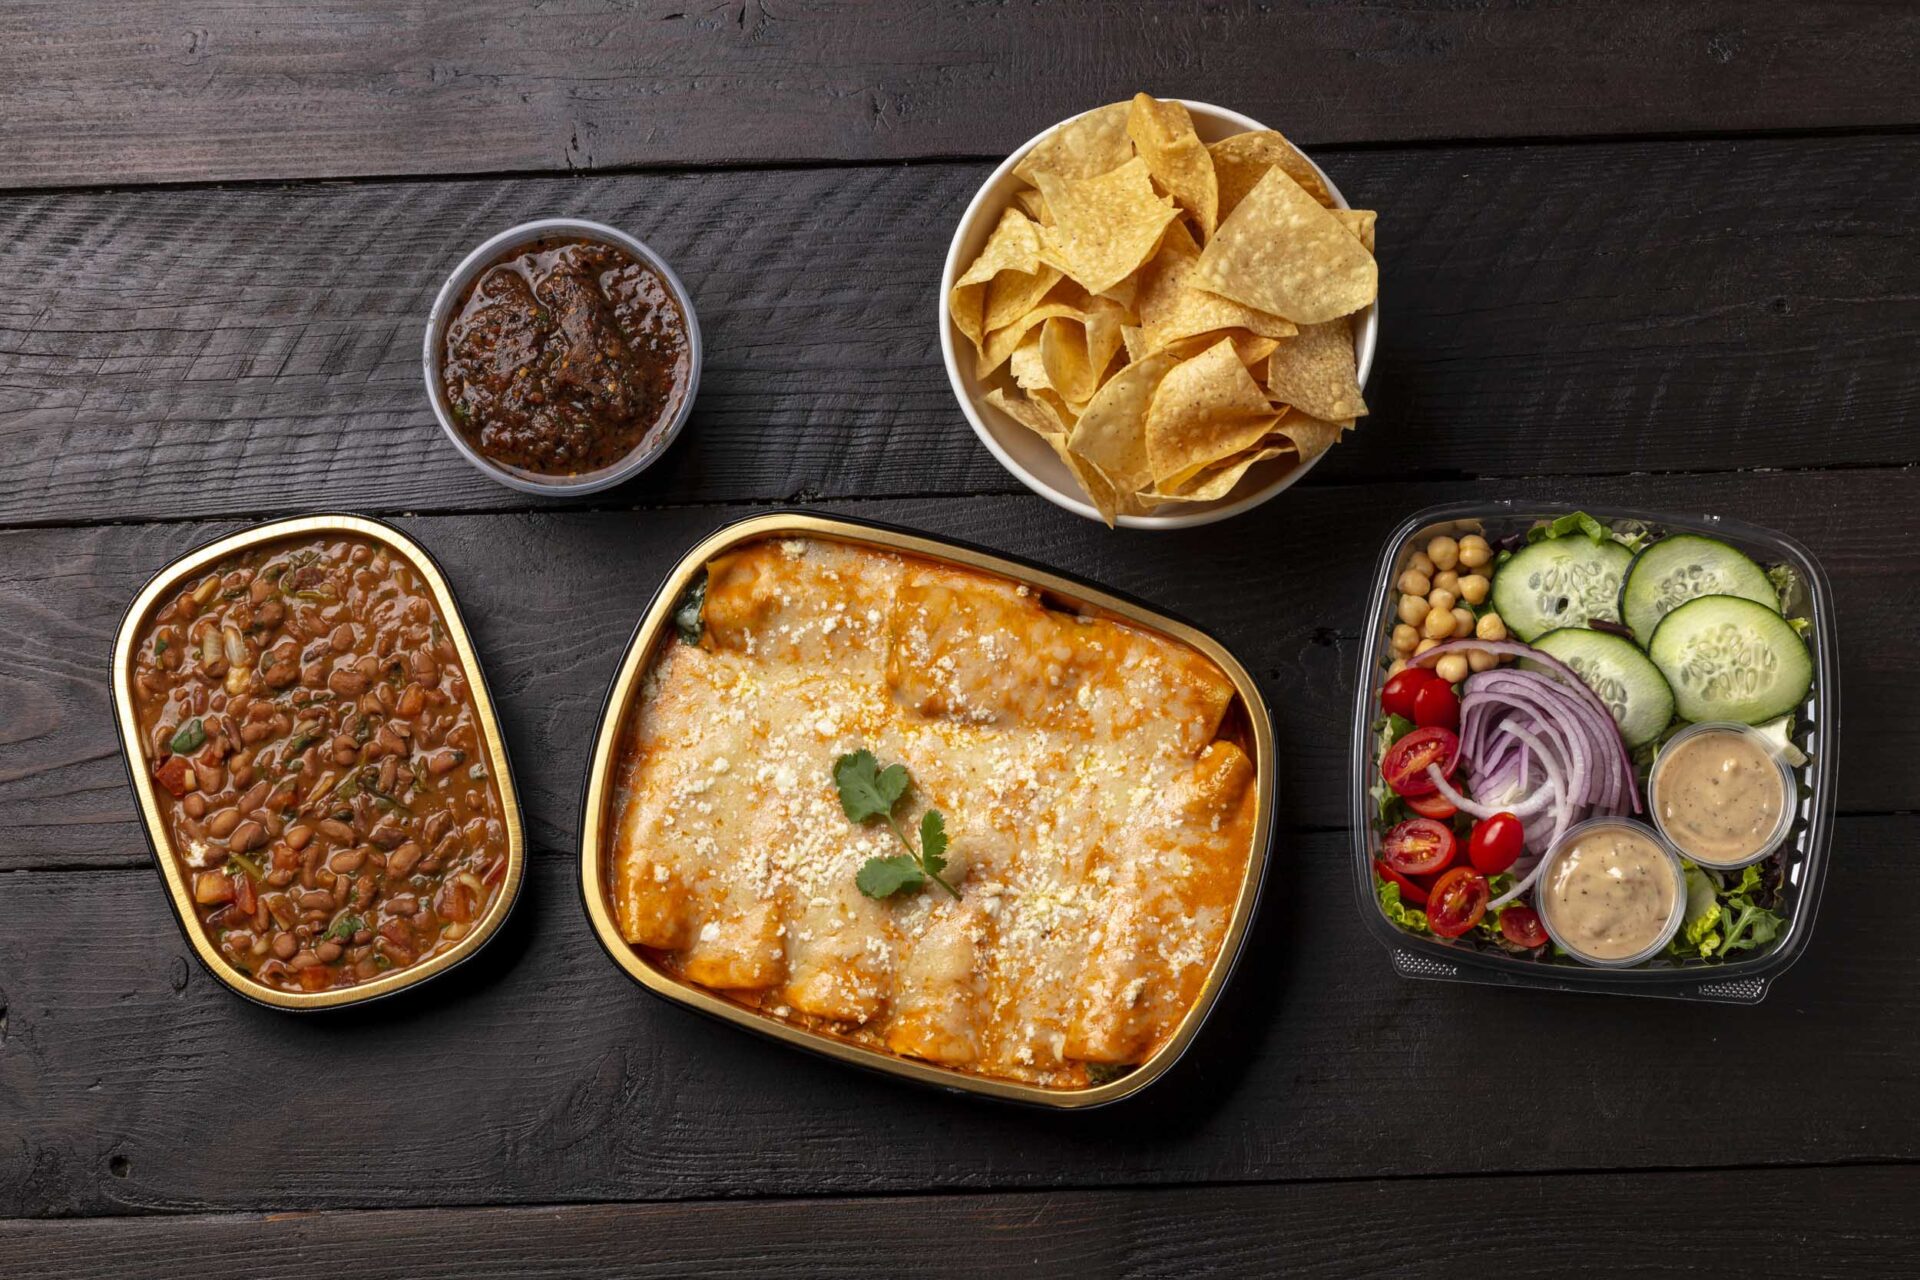 Family-Style To-Go
<br>Enjoy Hassle-Free, Flavorful Meals at Home Starting at $24 Per Person